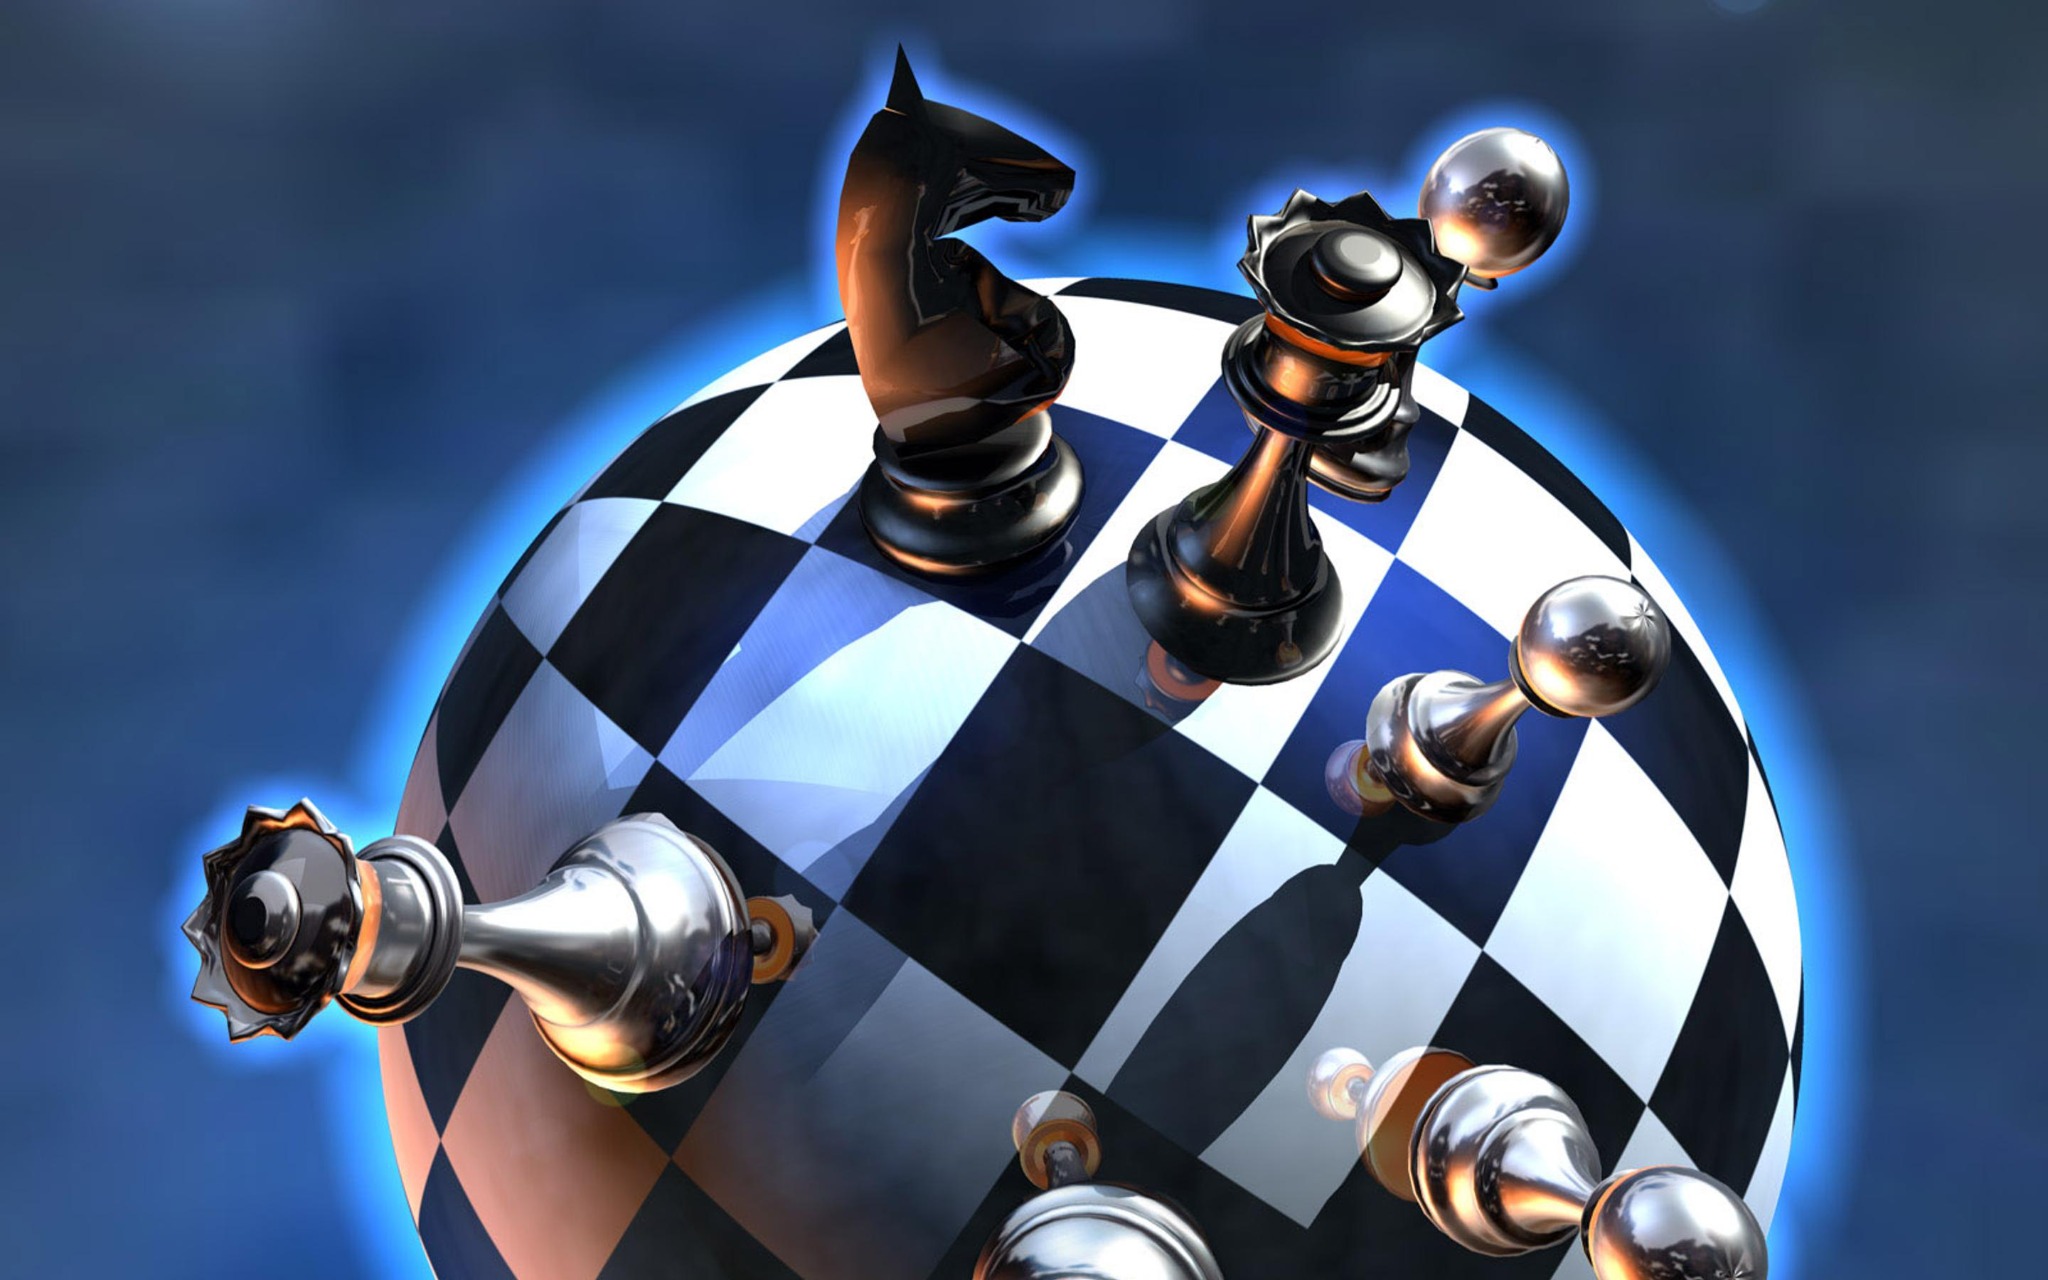 After 2023 World Open, a new chess era unfolding - The Chess Drum